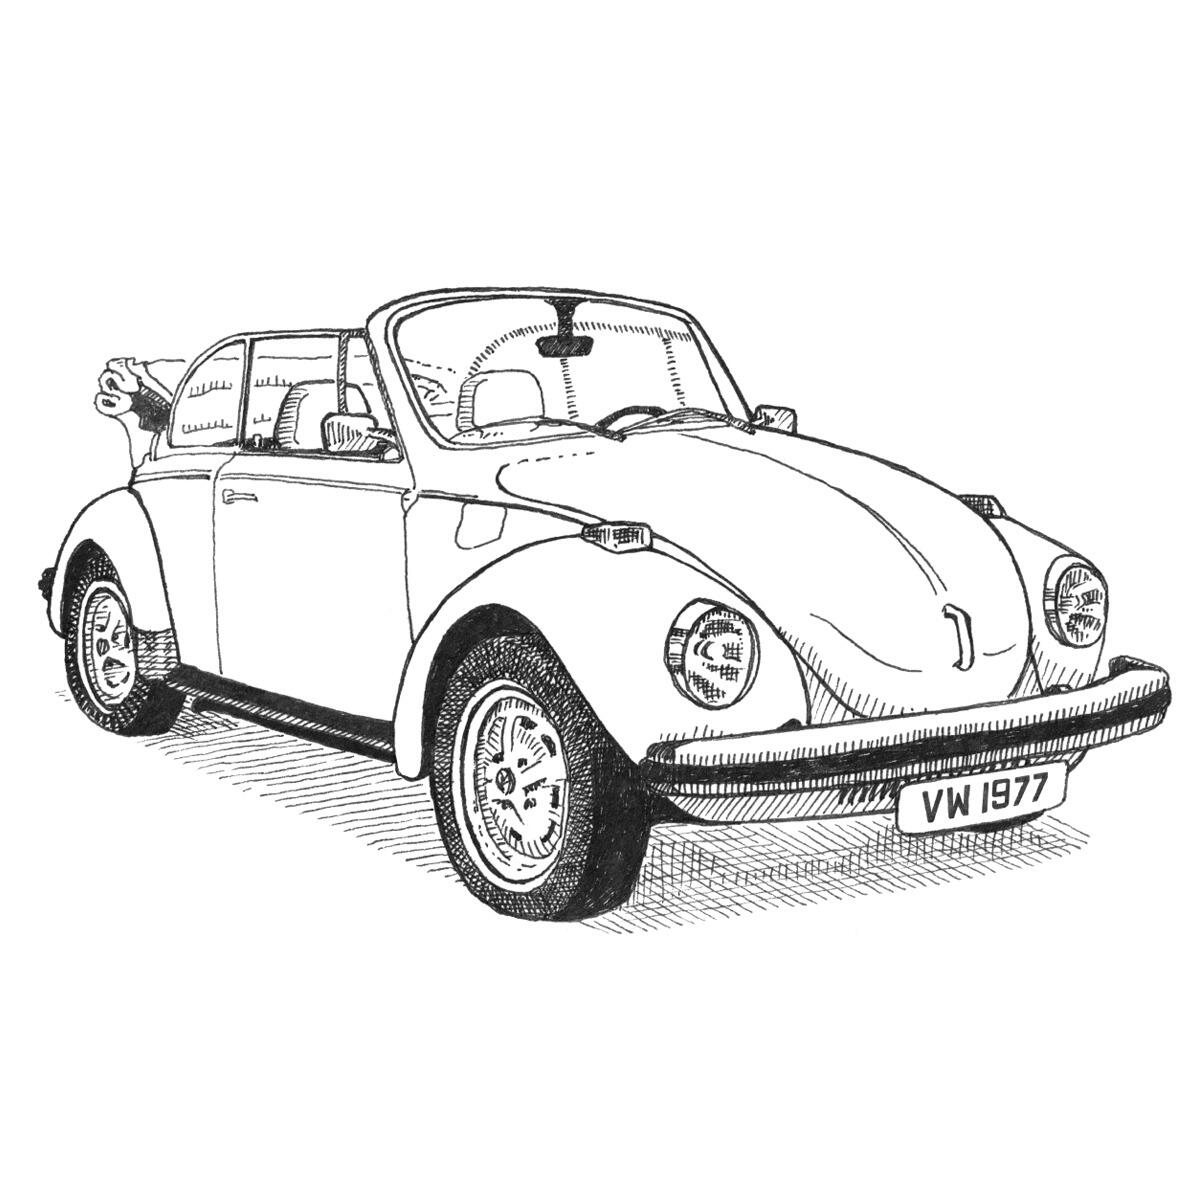 Limited edition print from pen and ink drawing of a 1977 soft-top VW Beetle